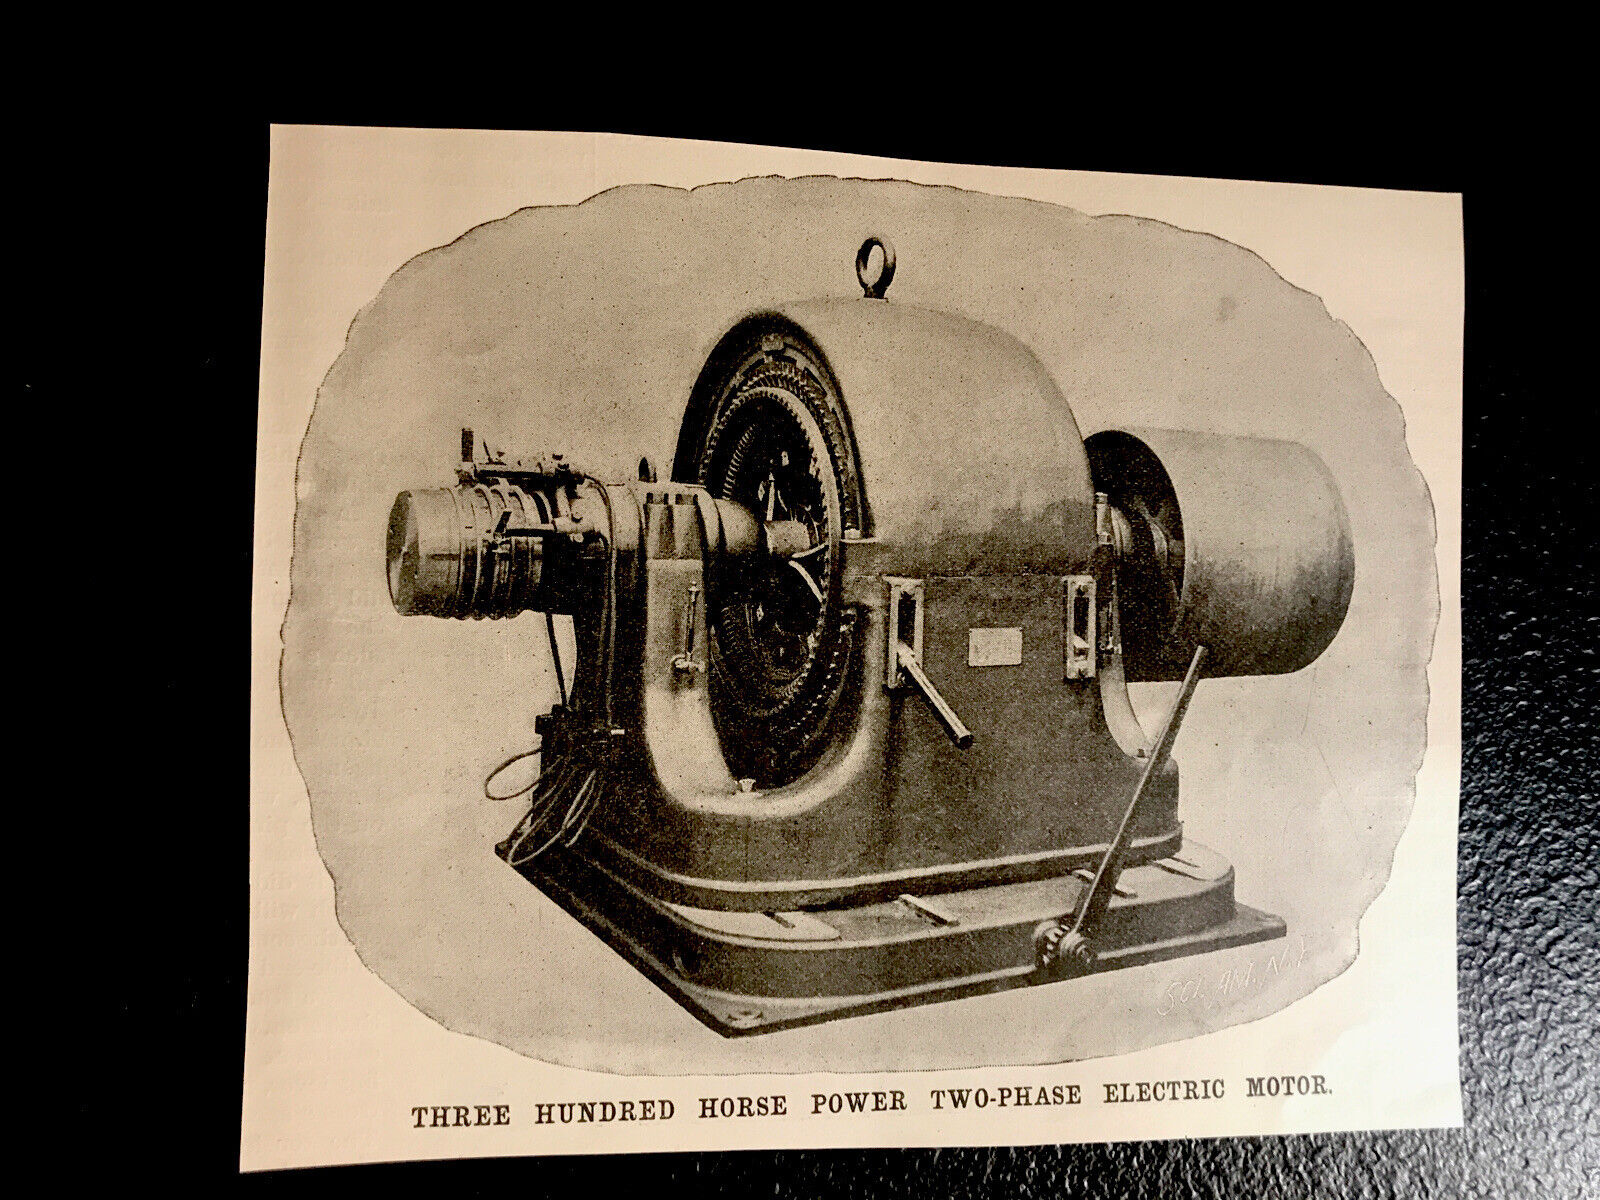 1896 Three Hundred Horse Power Two-Phase Electric Motor Advertising